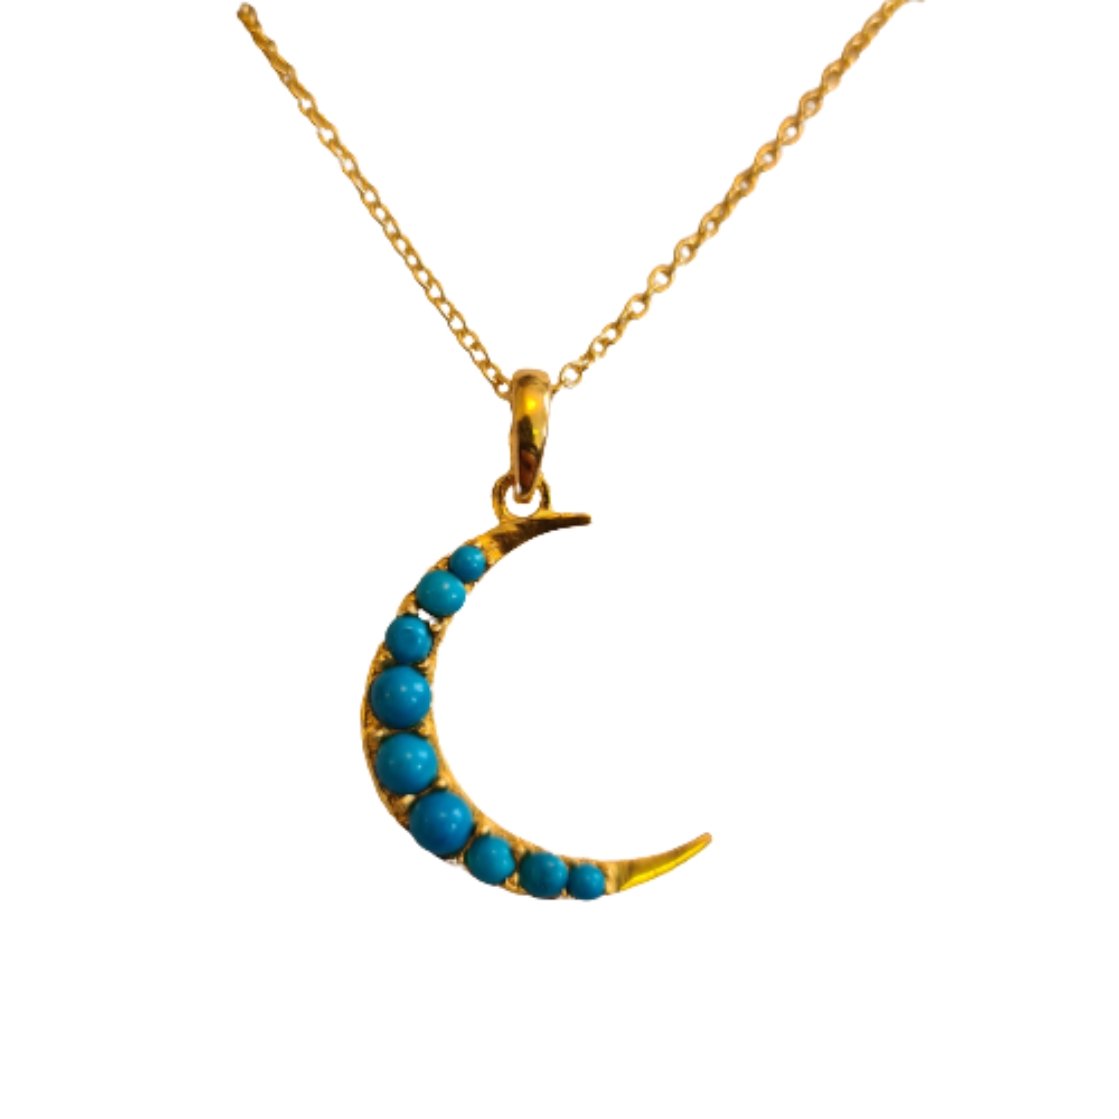 Turquoise crescent moon necklace